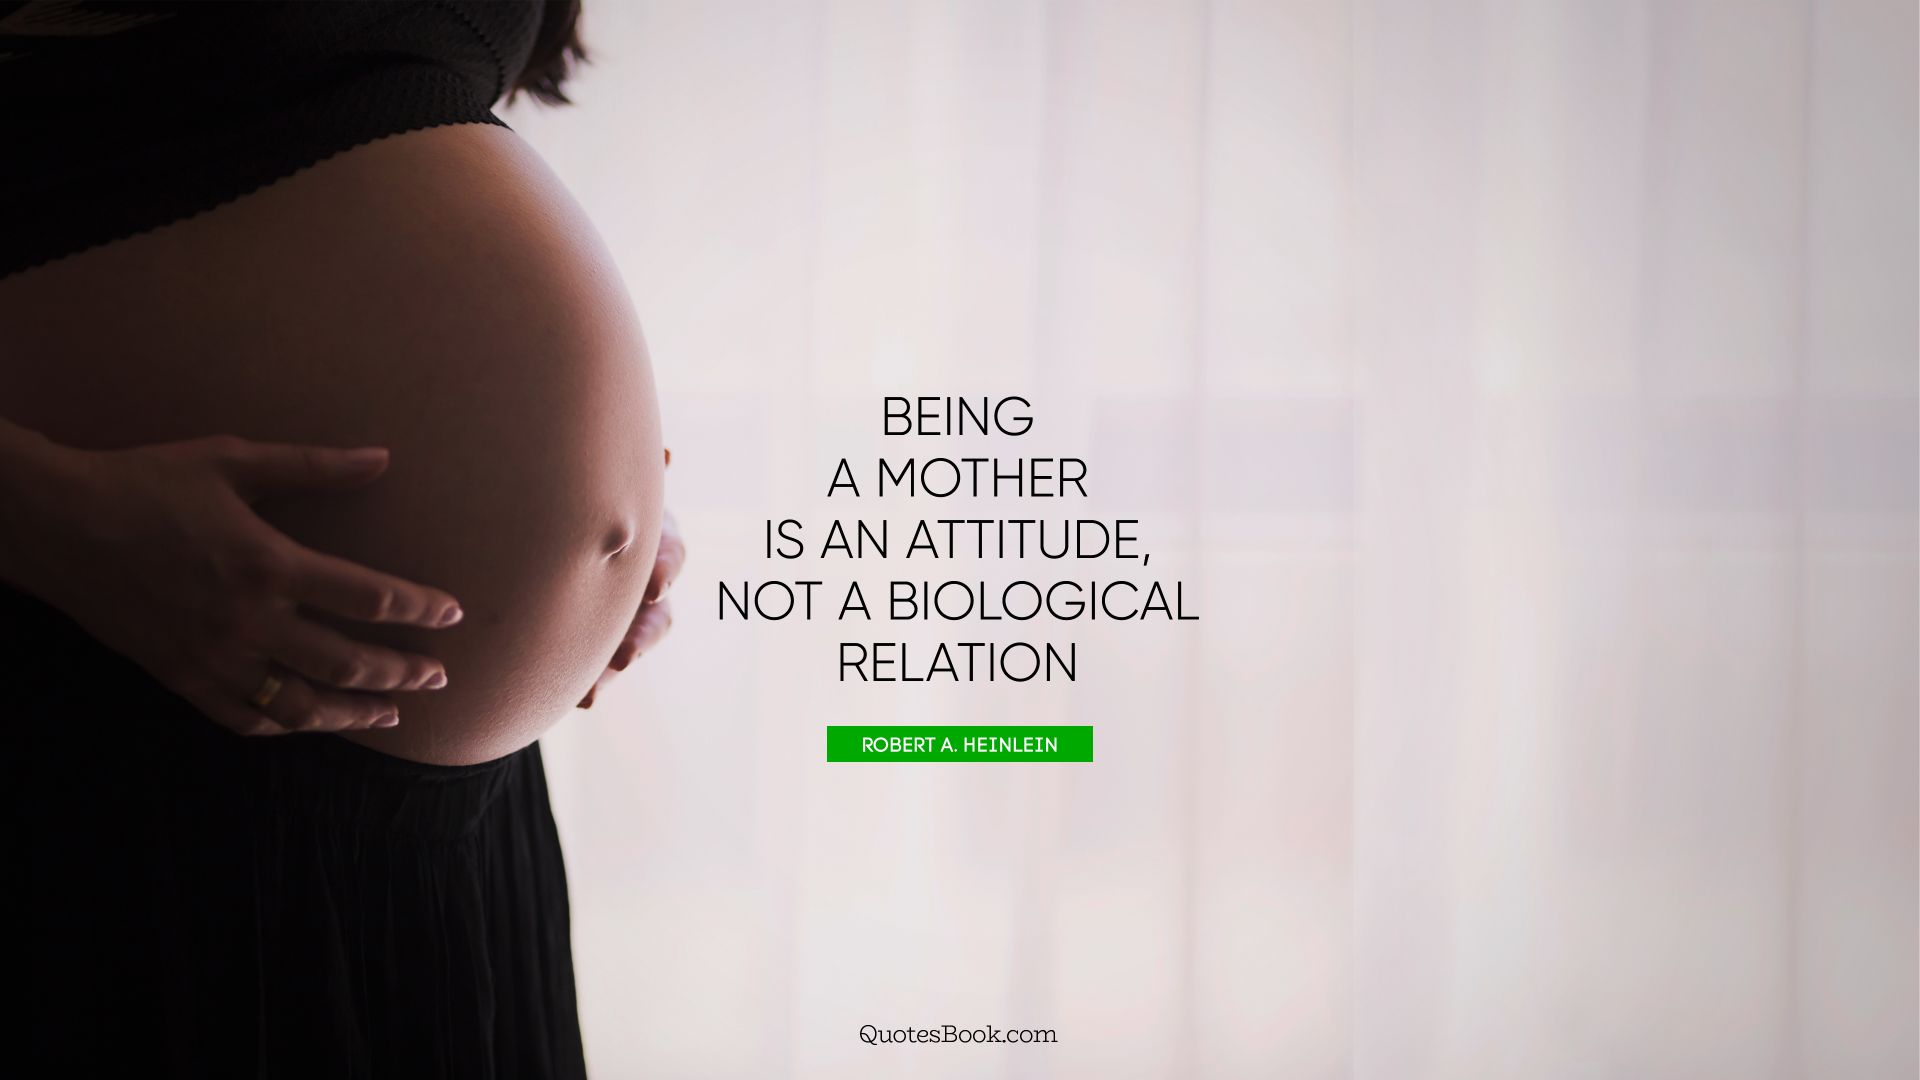 Being a mother is an attitude, not a biological relation. - Quote by Robert A. Heinlein